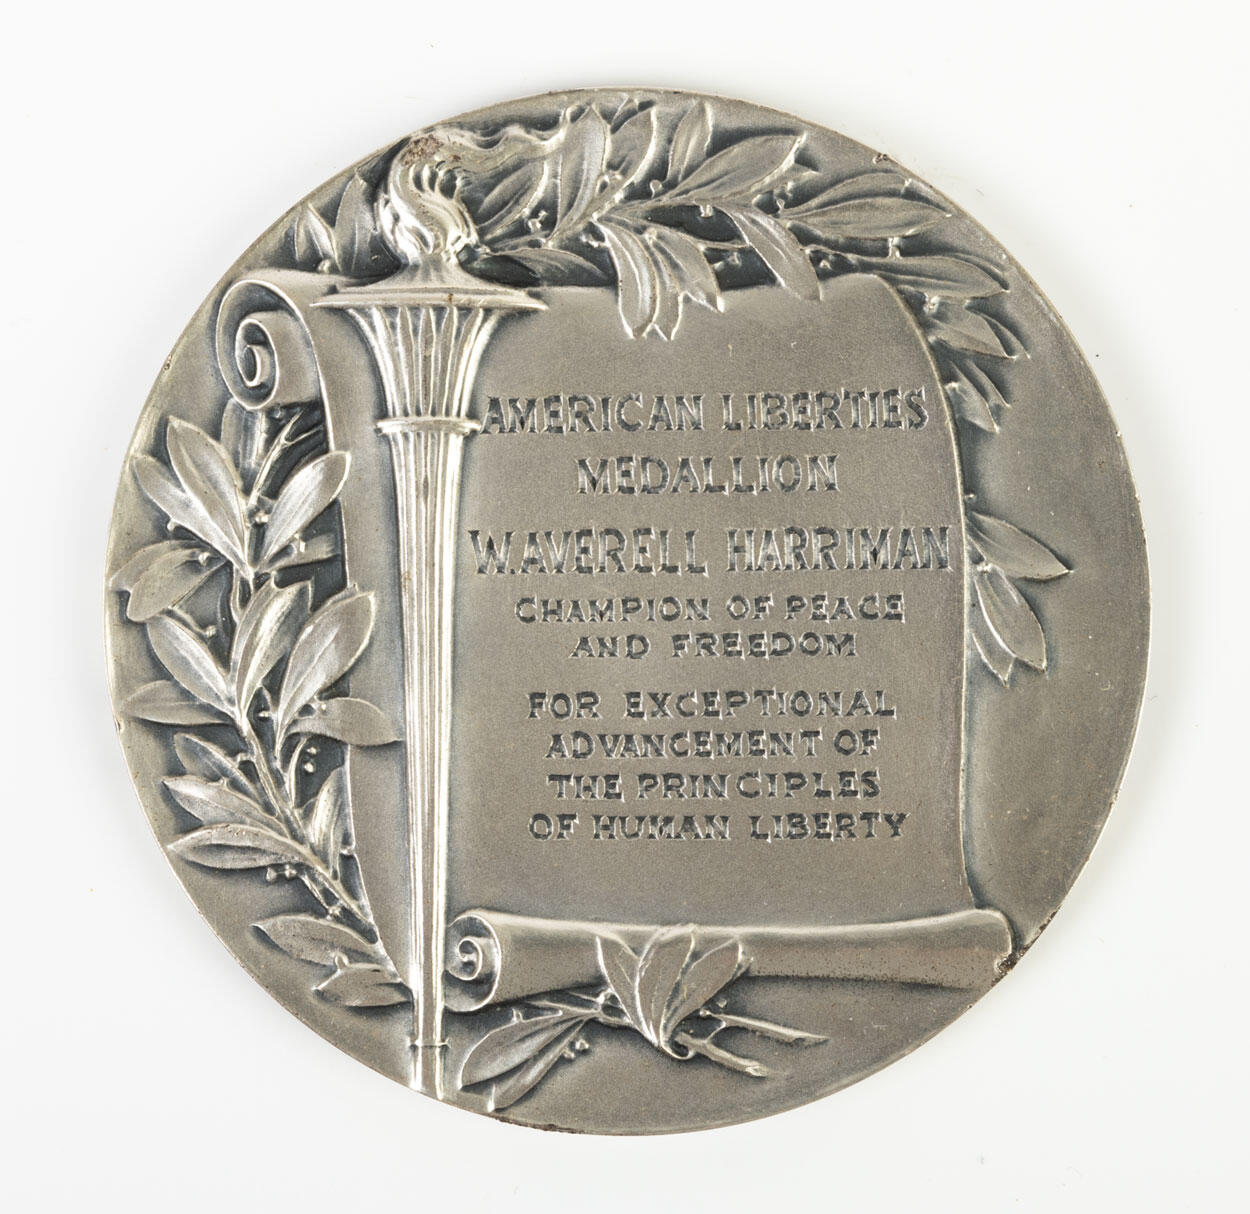 In commemoration of the 200th anniversary of the War of 1812 Russian  Medal 